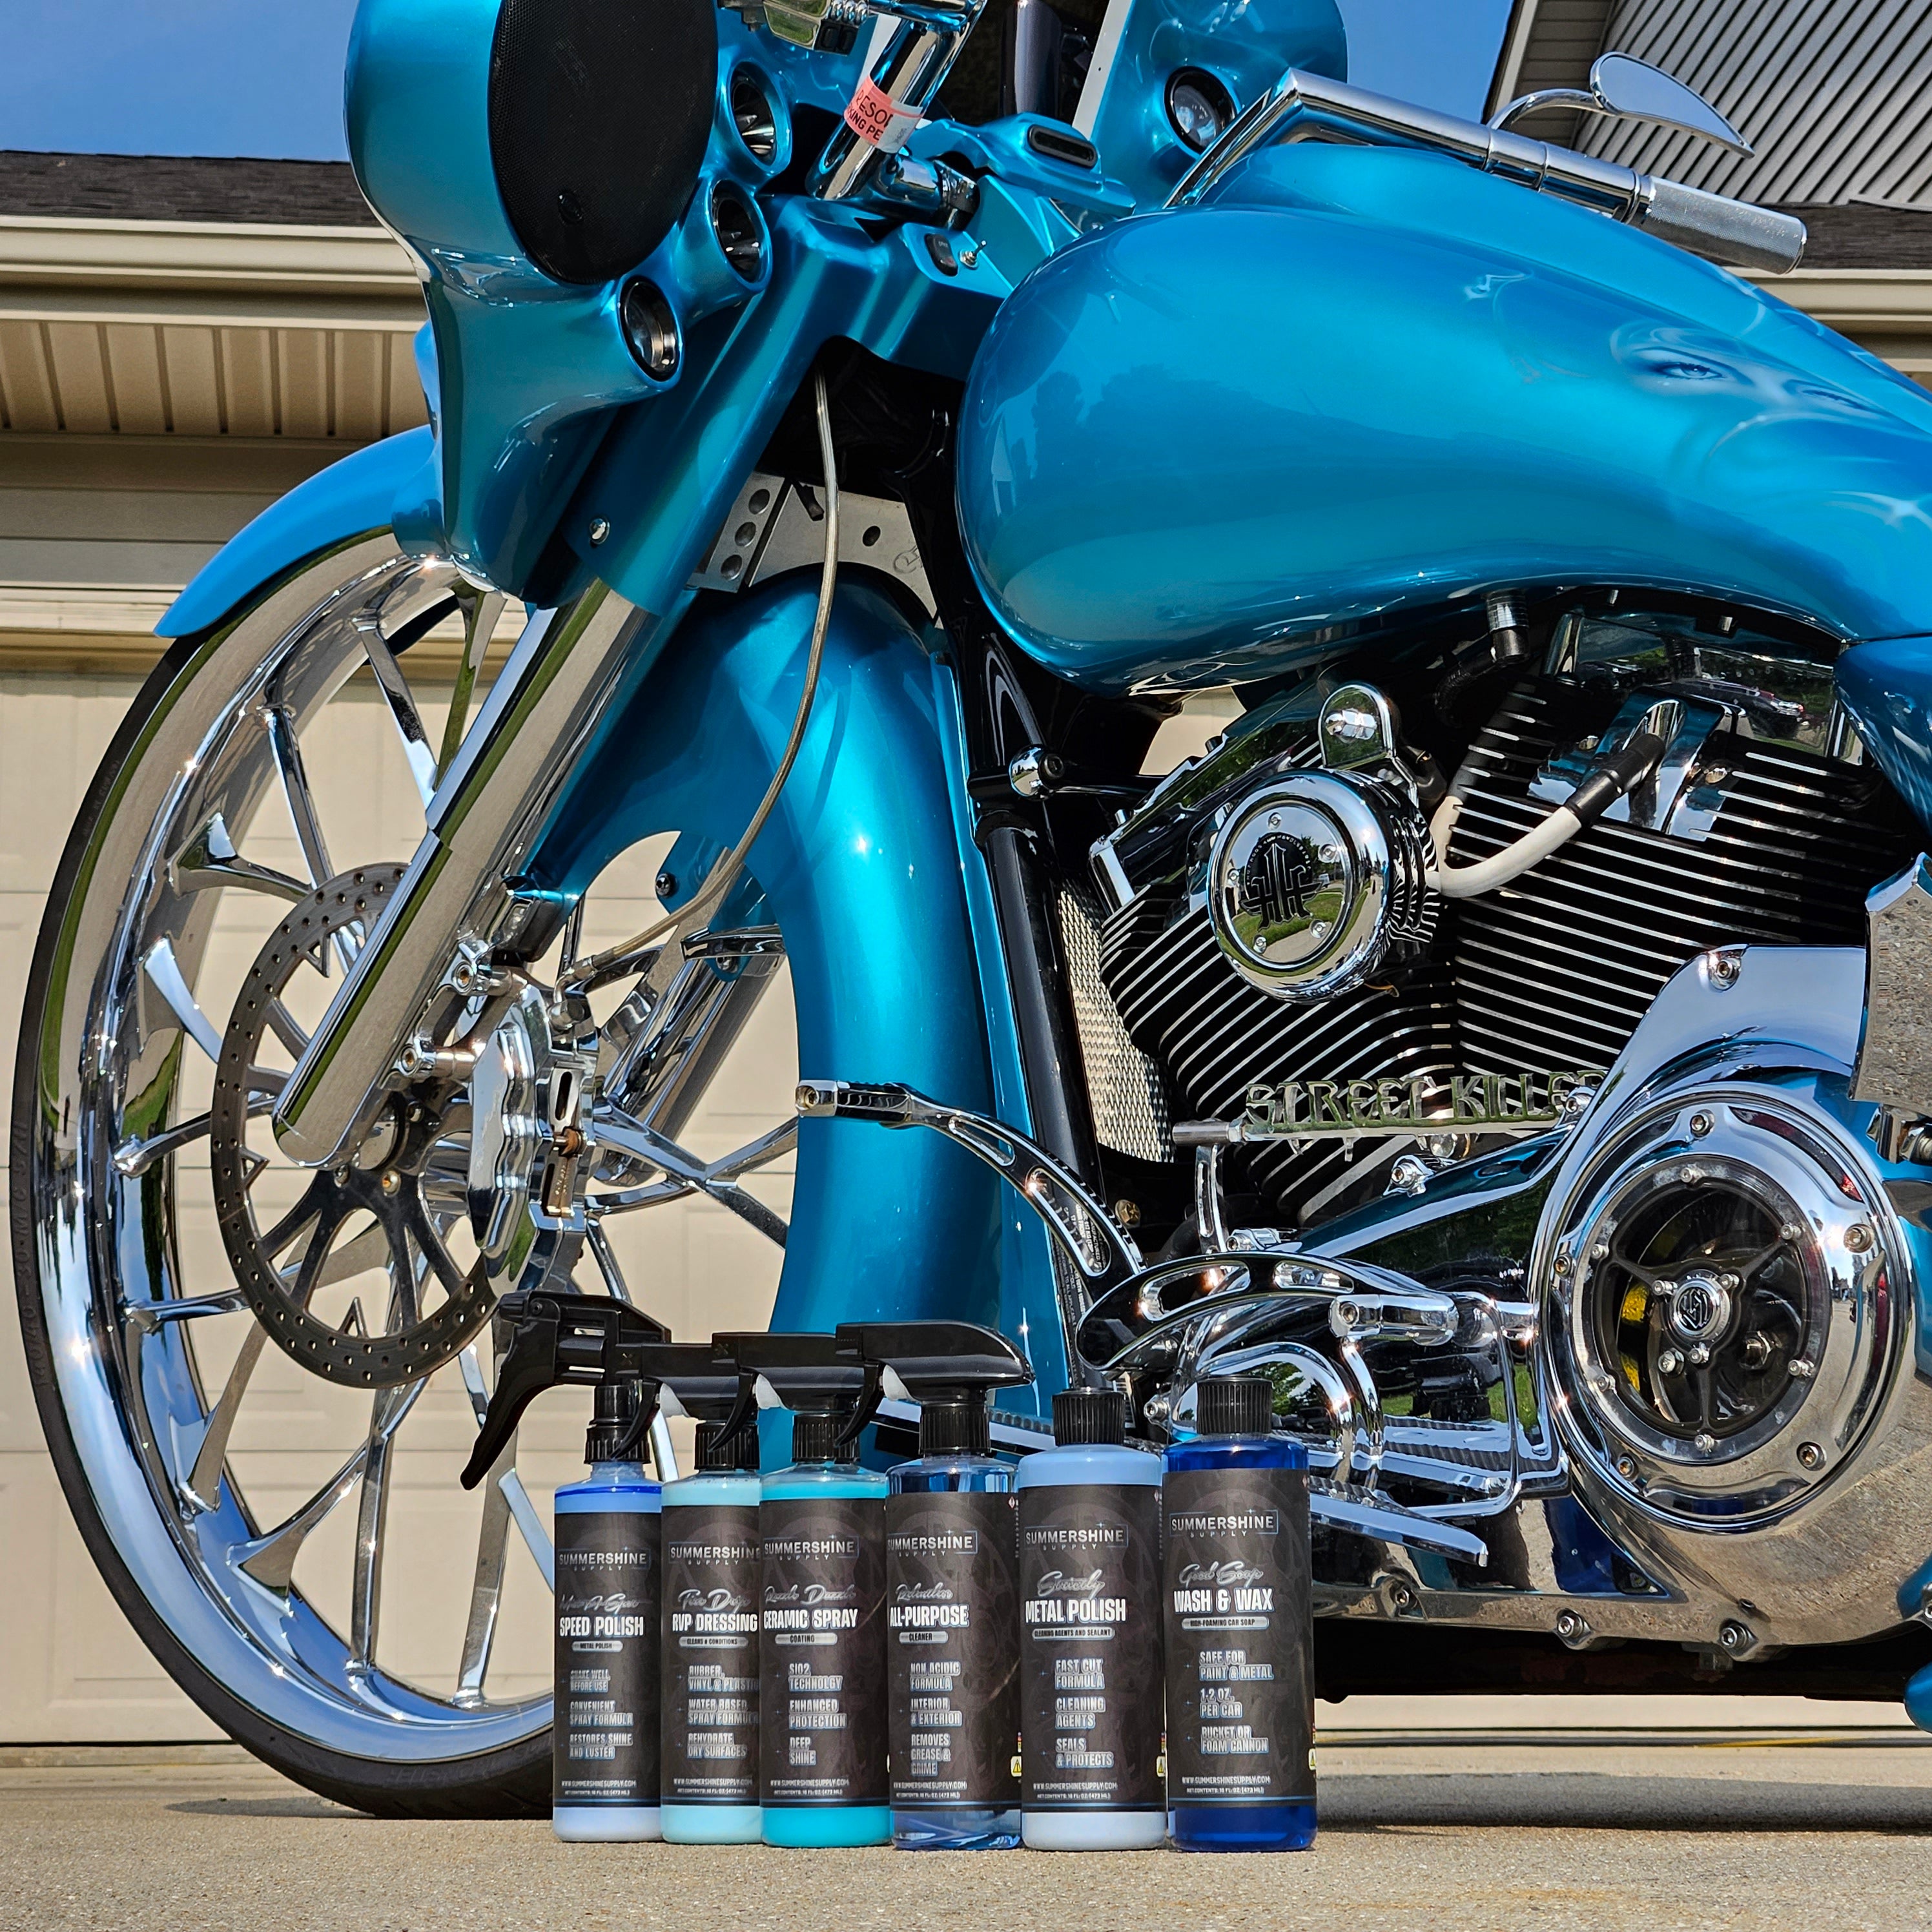 SummerShine for motorcycles